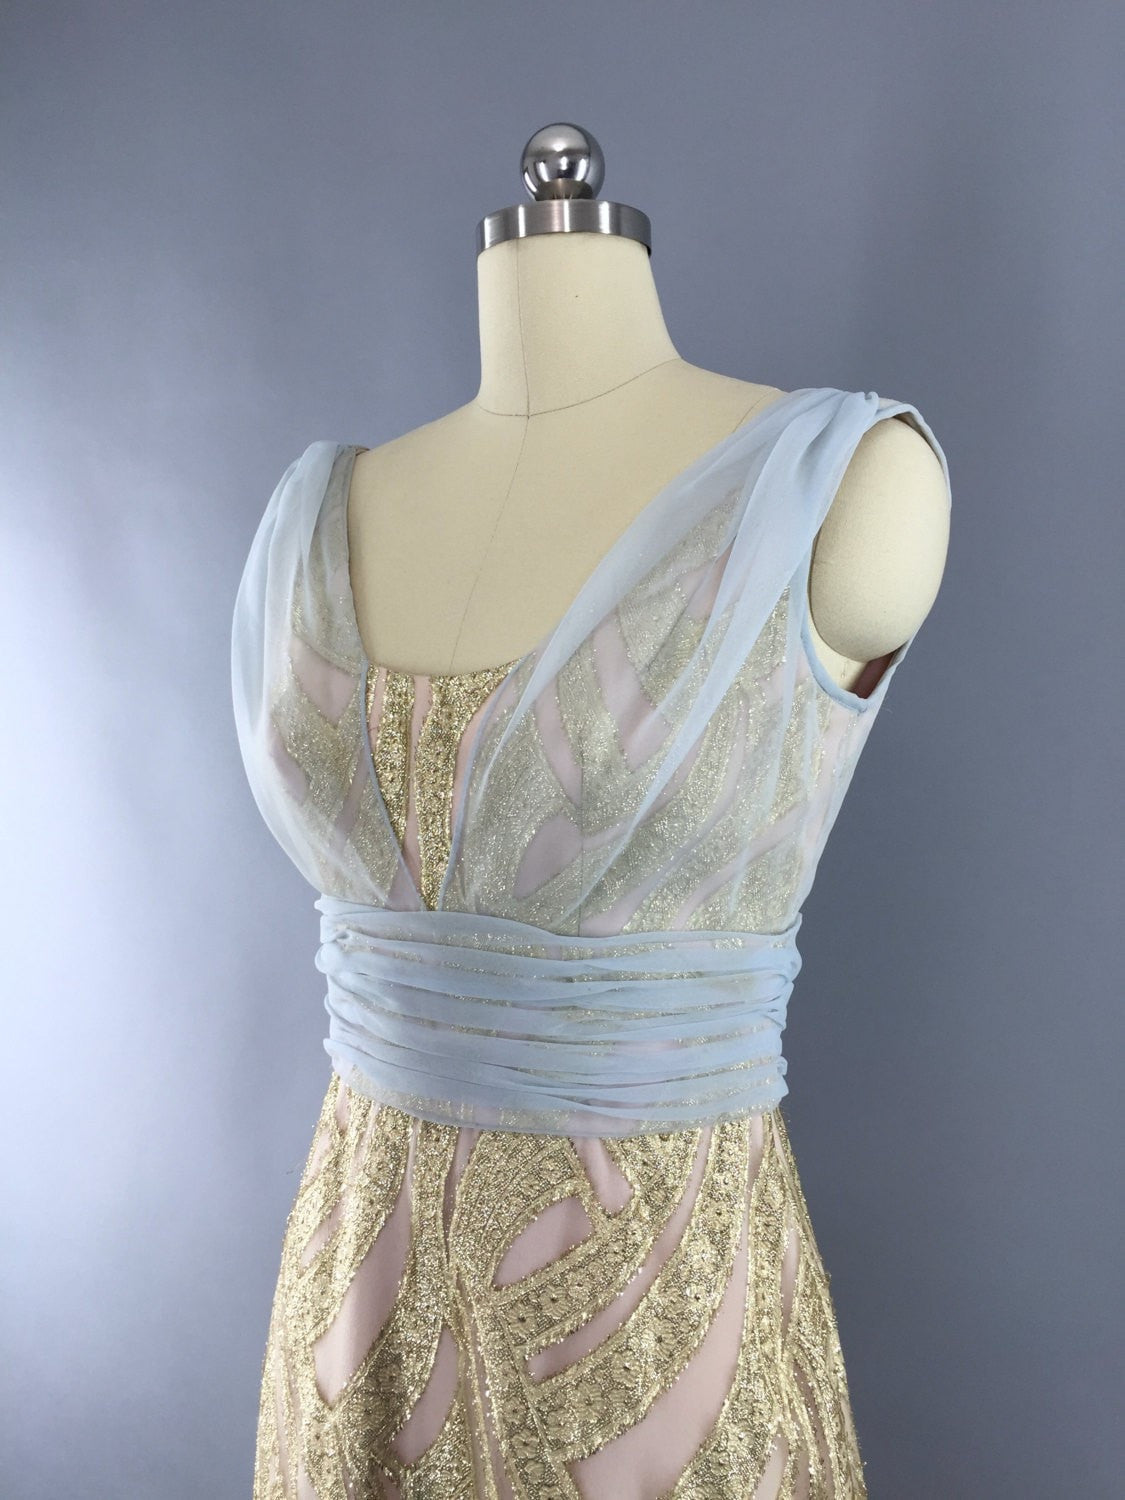 Vintage 1960s Grecian Goddess Gold Maxi Dress by Rose Taft for Helen Siki - ThisBlueBird